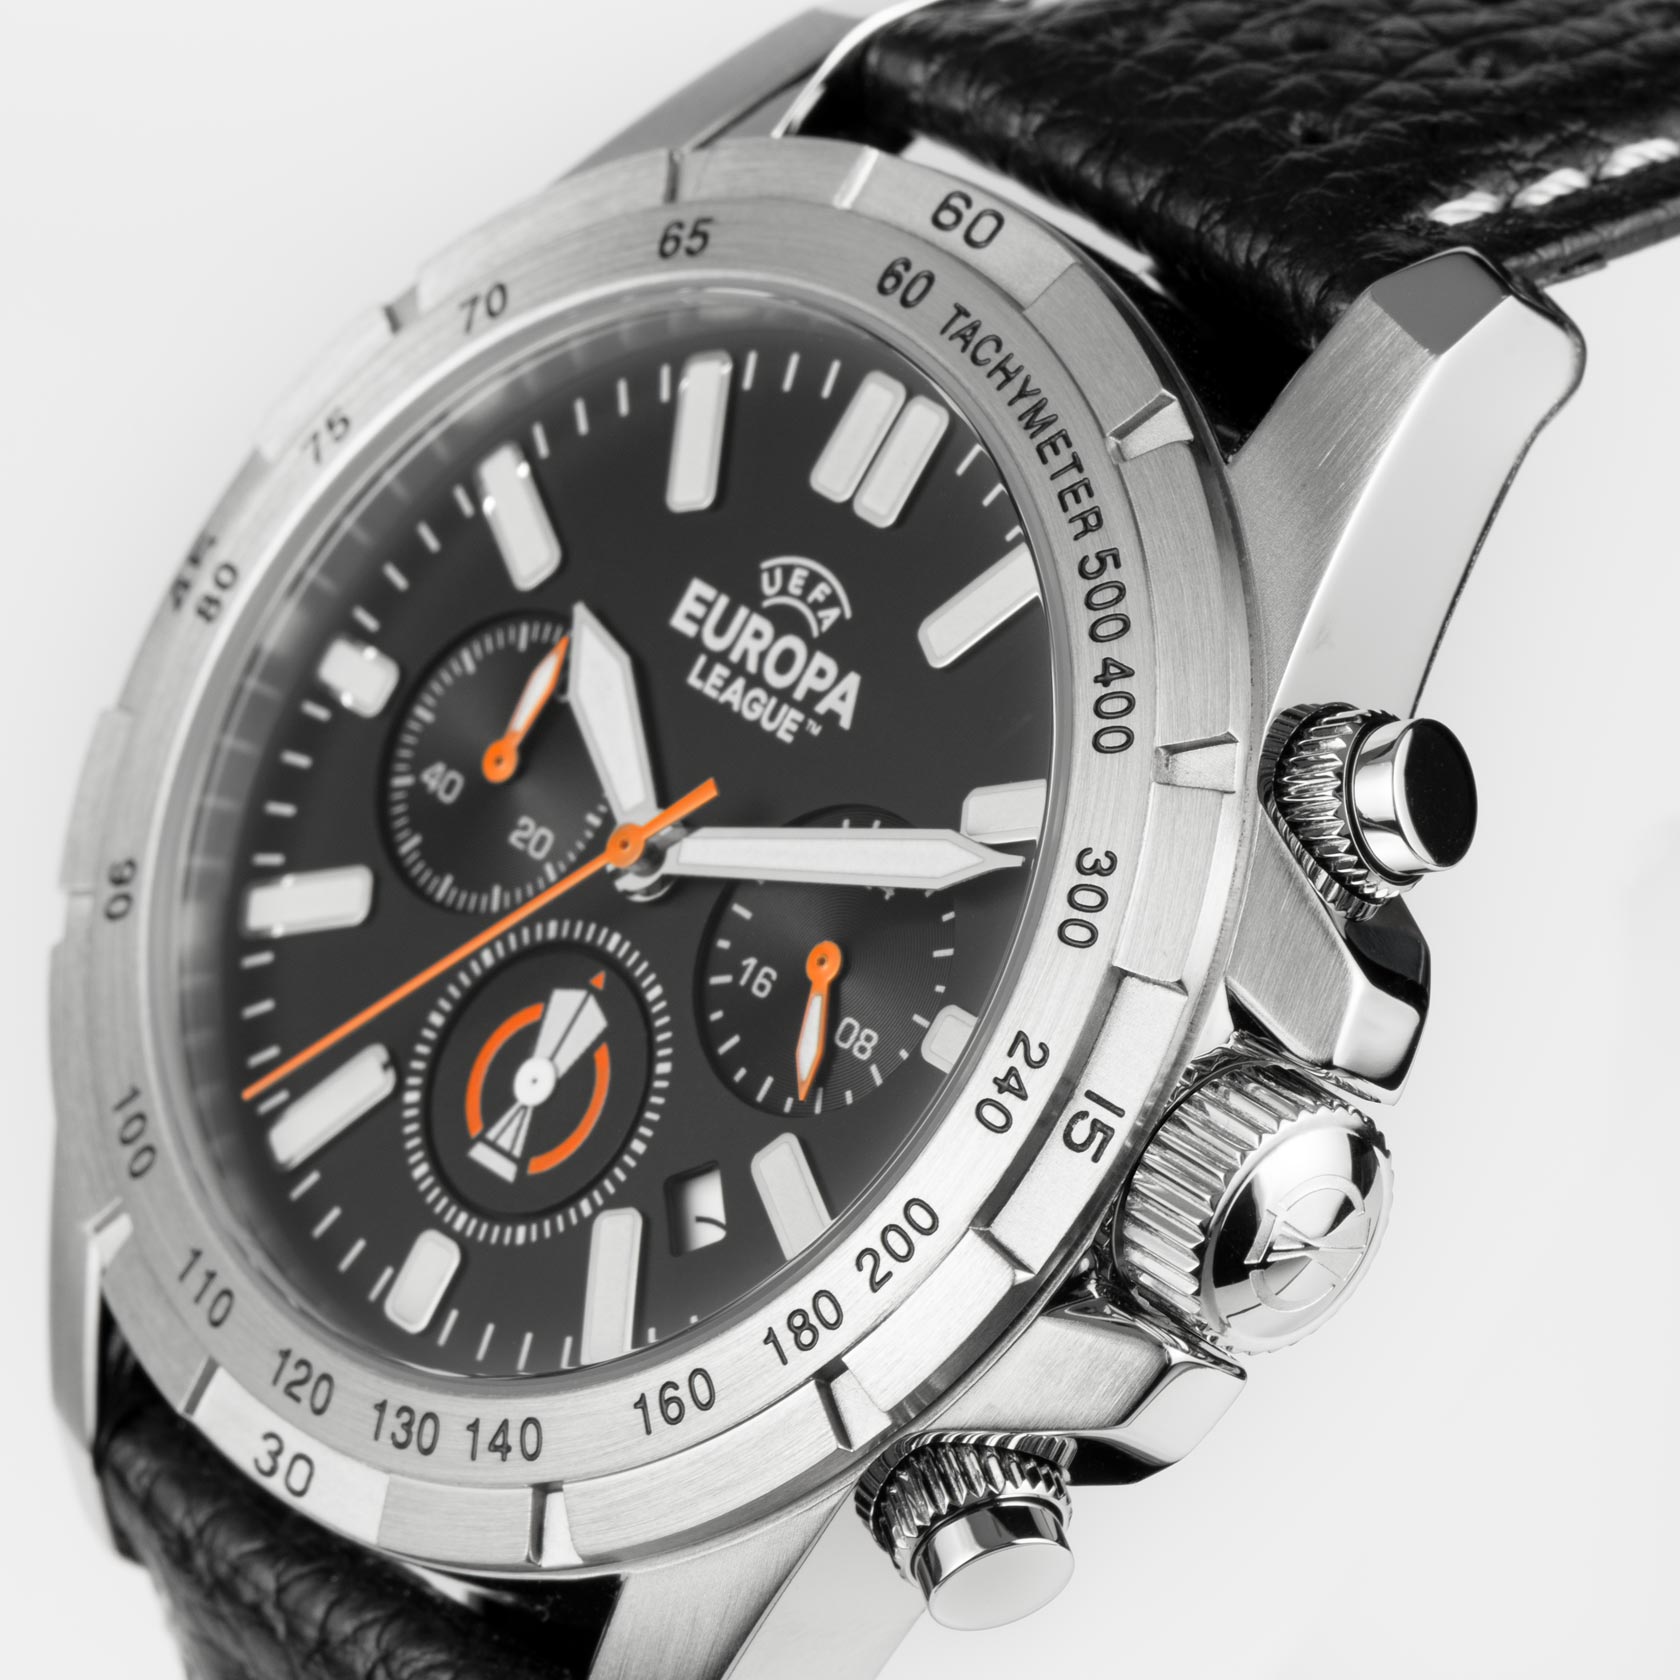 UEFA Europa League Timepieces UEFA Club Competitions Online Store